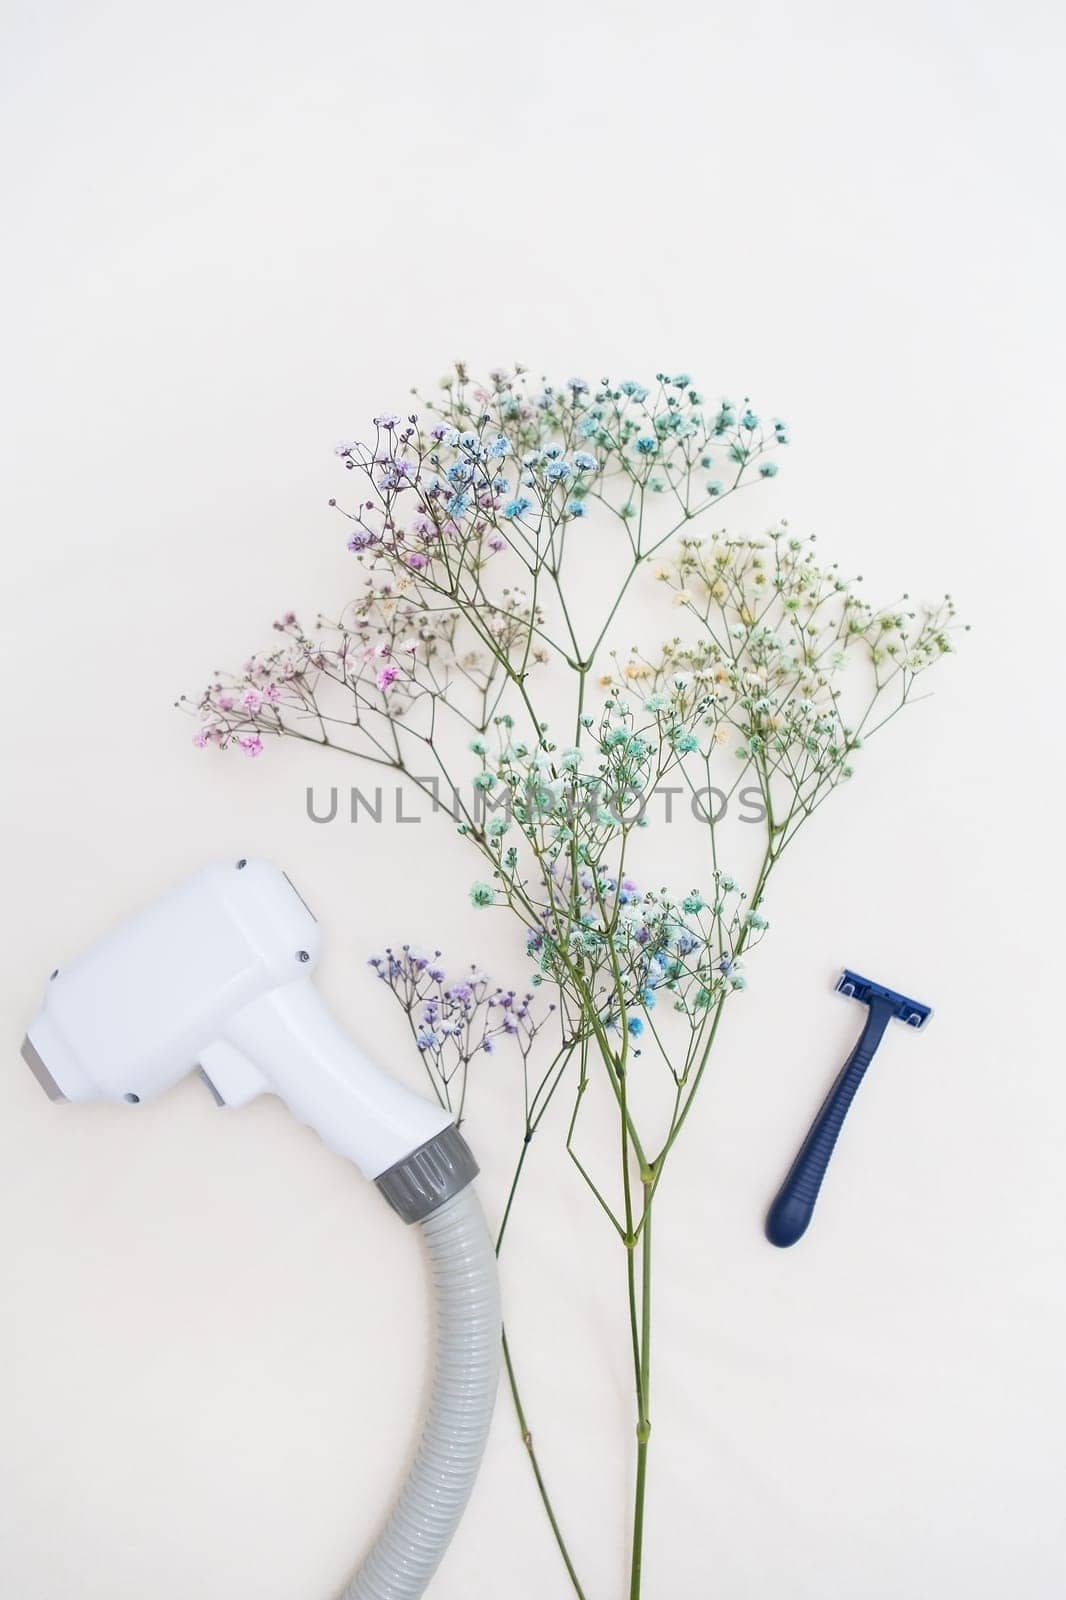 A laser hair removal machine and a razor are juxtaposed with delicate flowers on a light background, symbolizing the contrast between modern technology and the standard method of hair removal. by sfinks